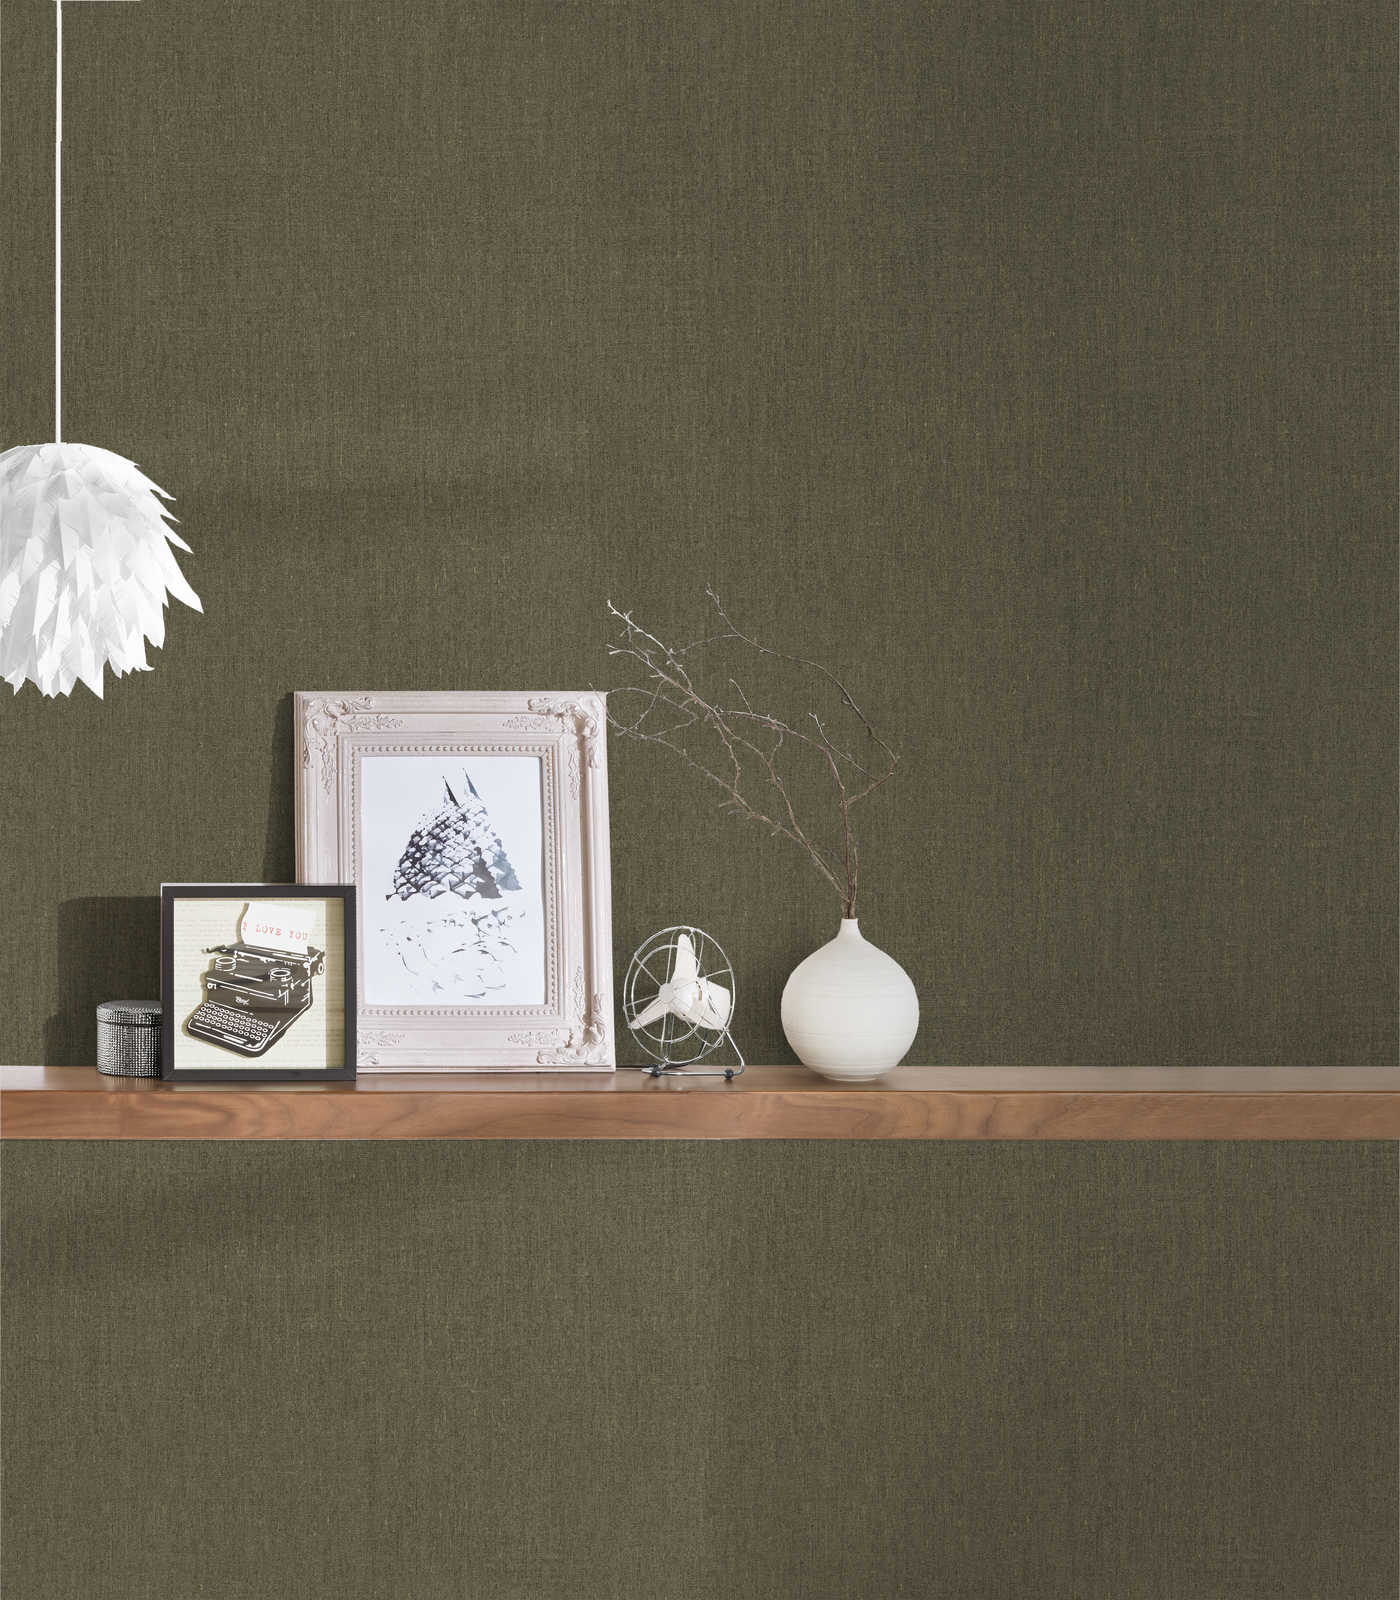             wallpaper light brown and olive mottled, with structure detail - brown
        